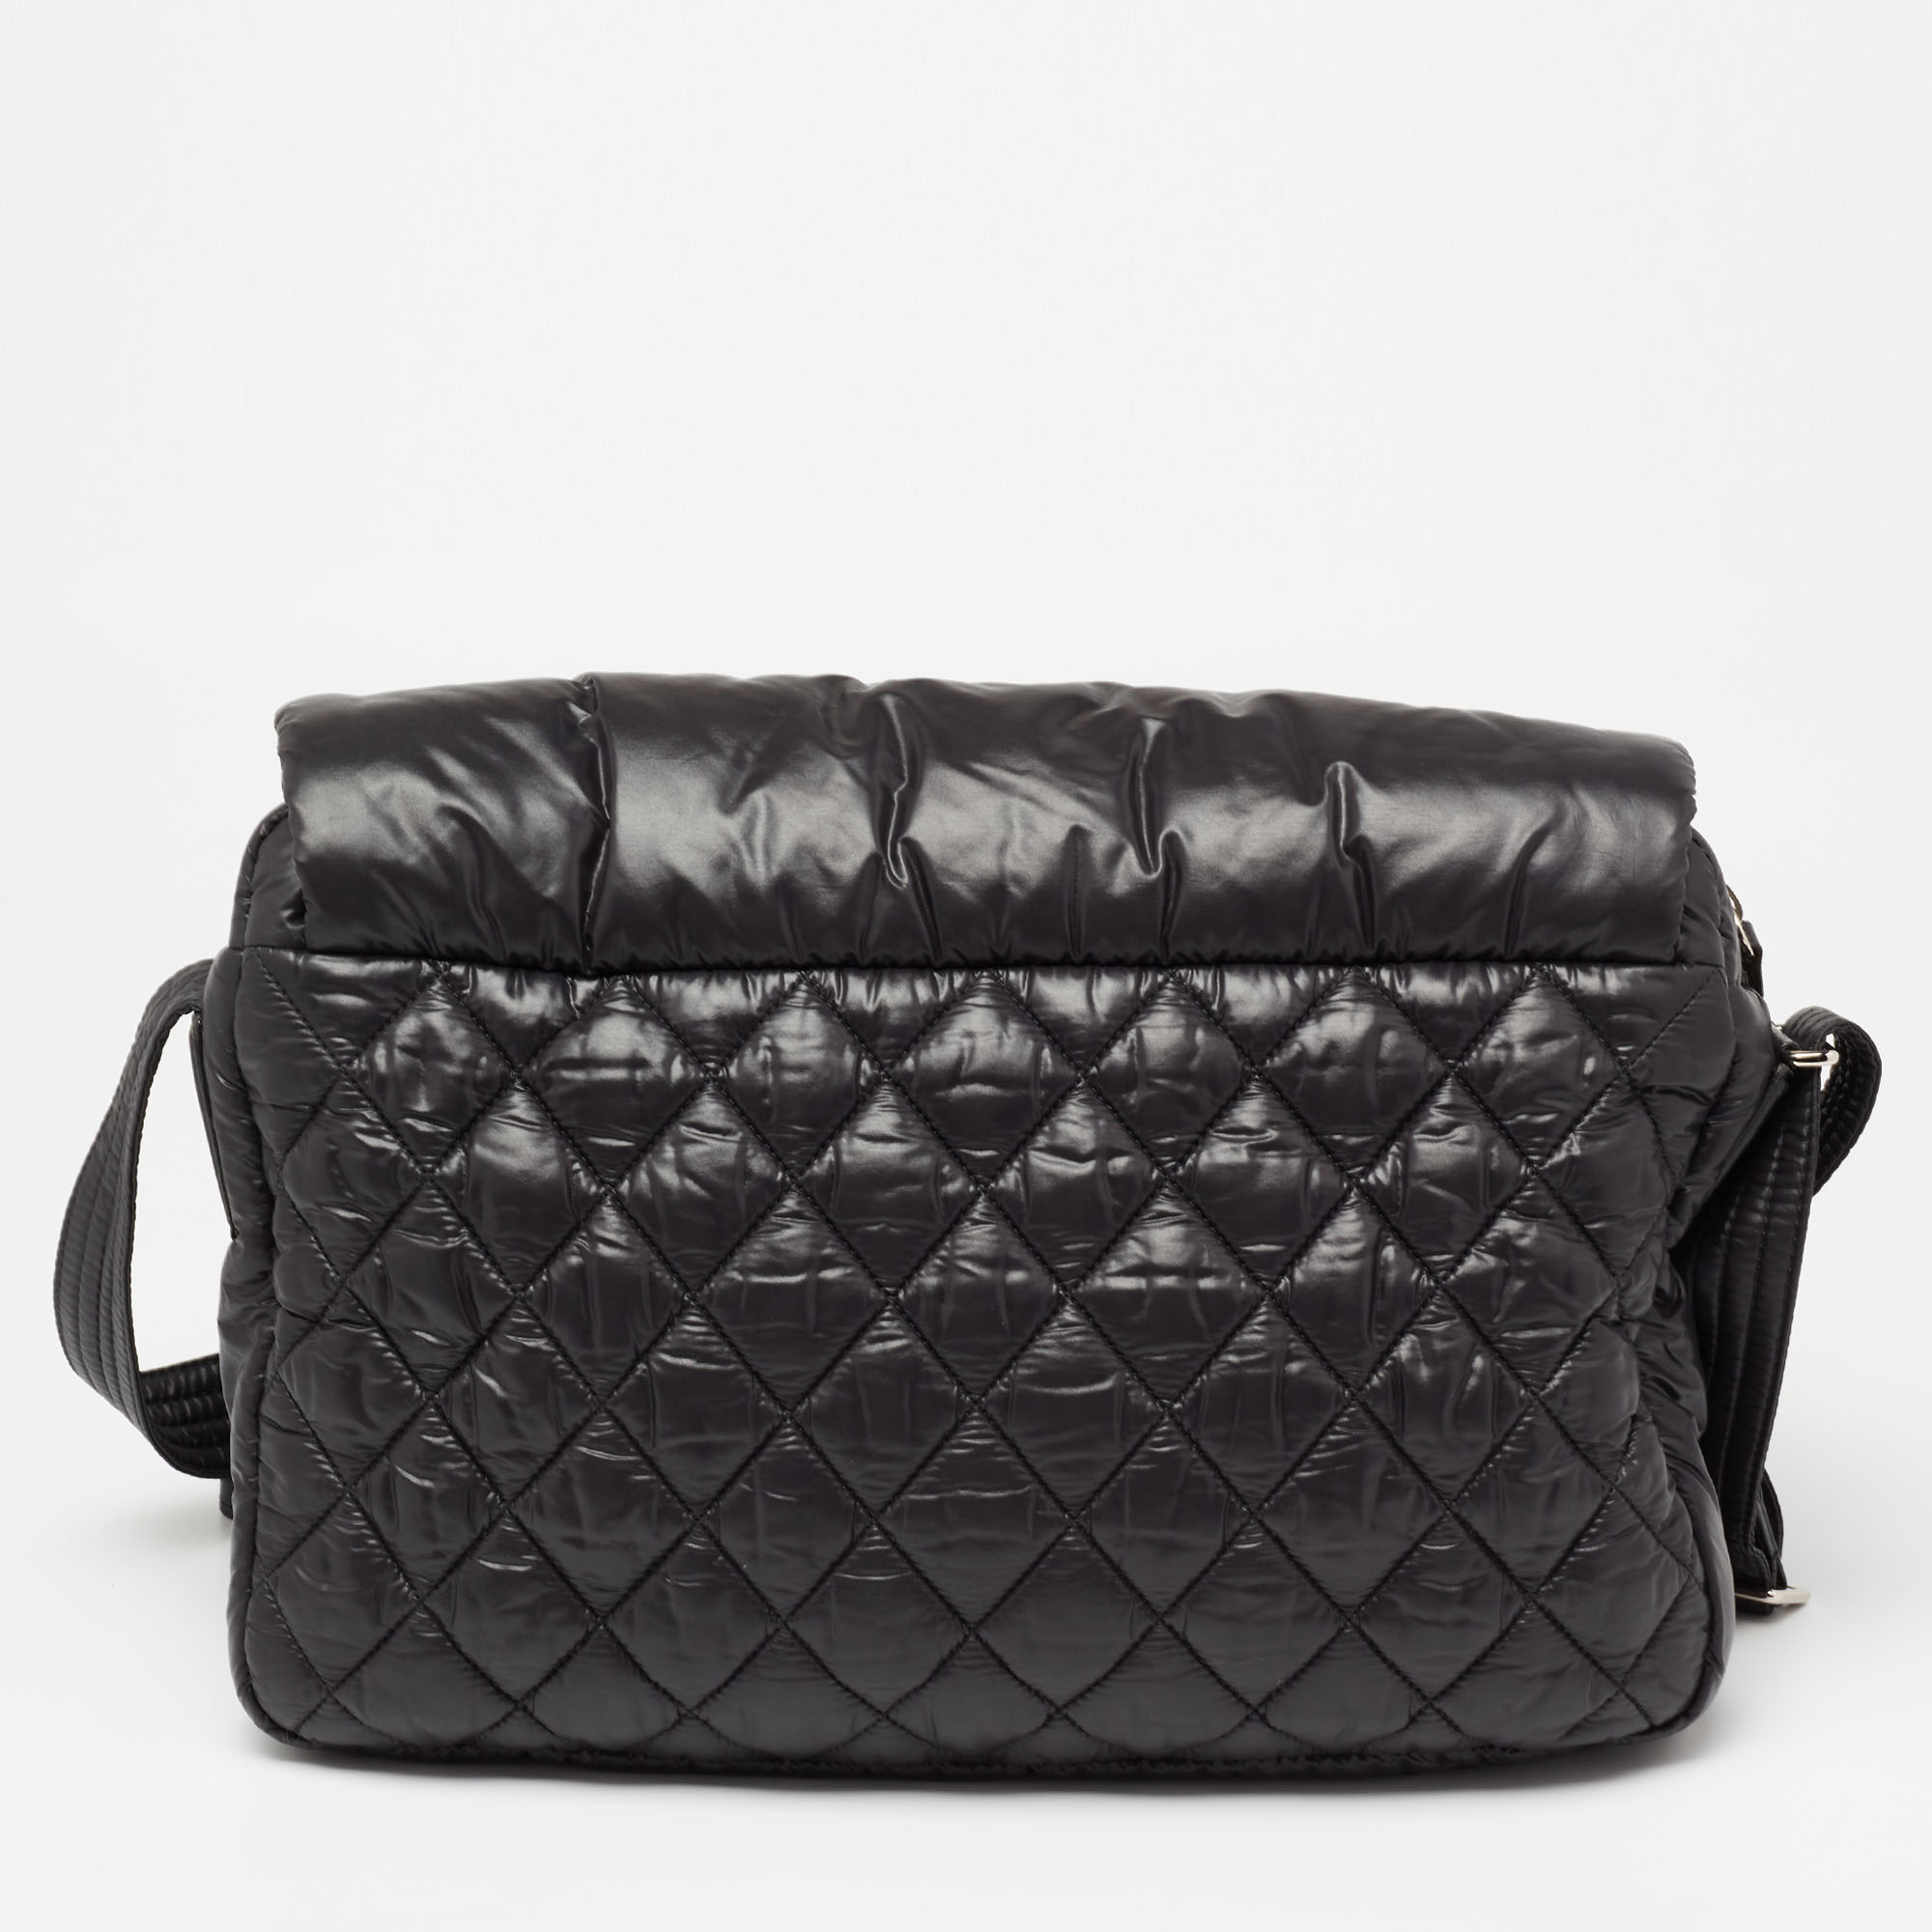 Chanel Black Quilted Nylon Coco Cocoon Messenger Bag